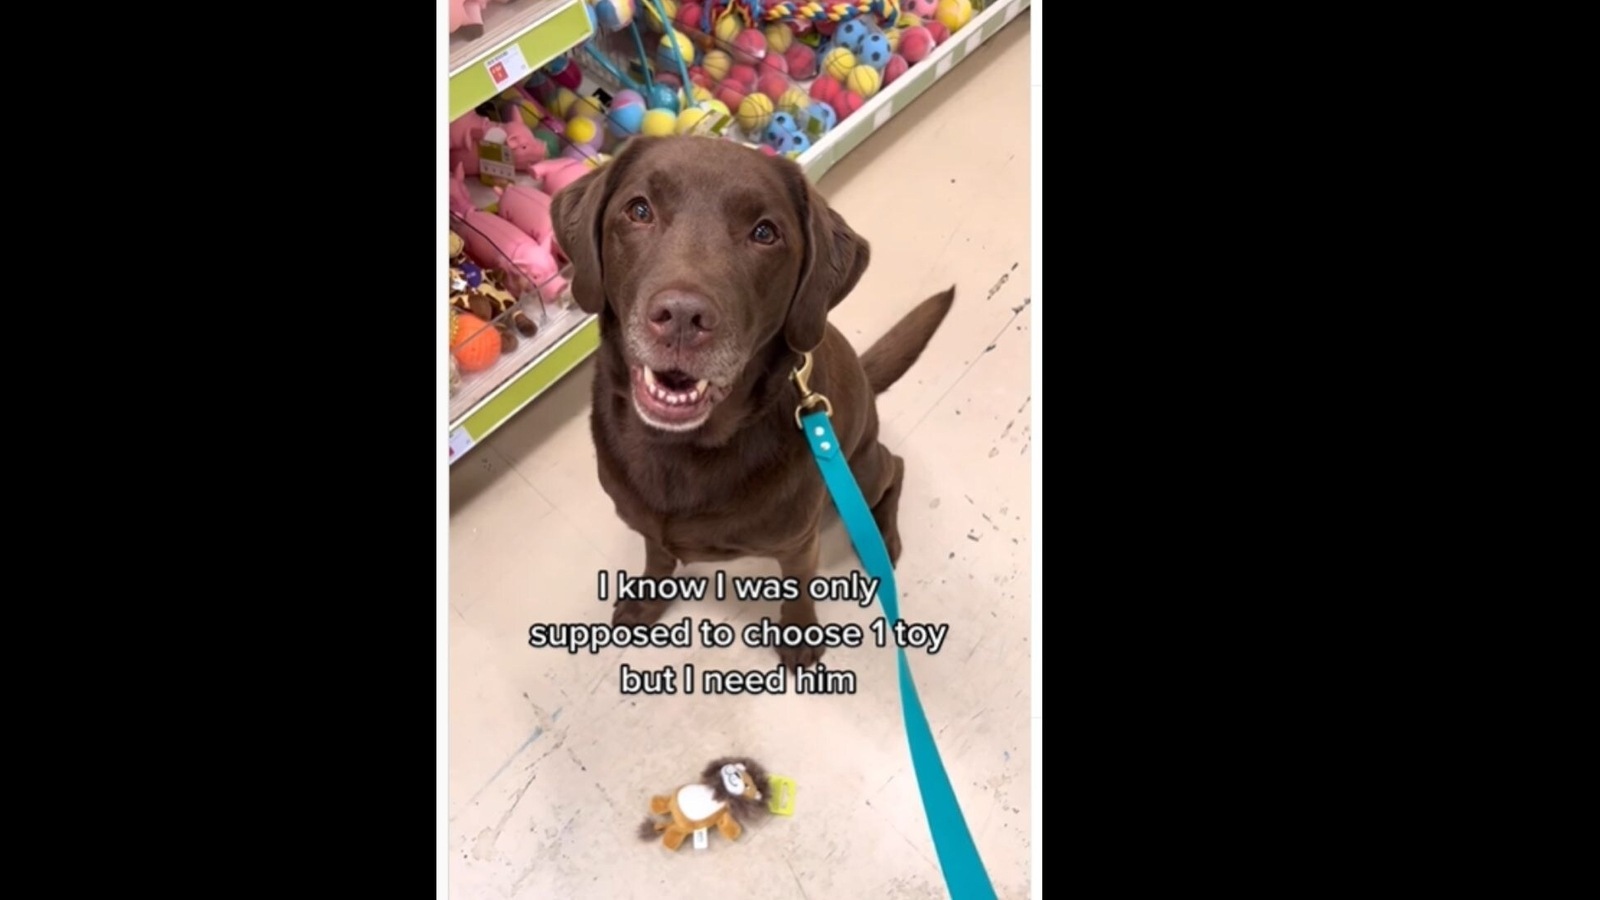 https://images.hindustantimes.com/img/2022/06/14/1600x900/Human_takes_dog_shopping_for_a_new_toy_1655201444055_1655201458198.jpg